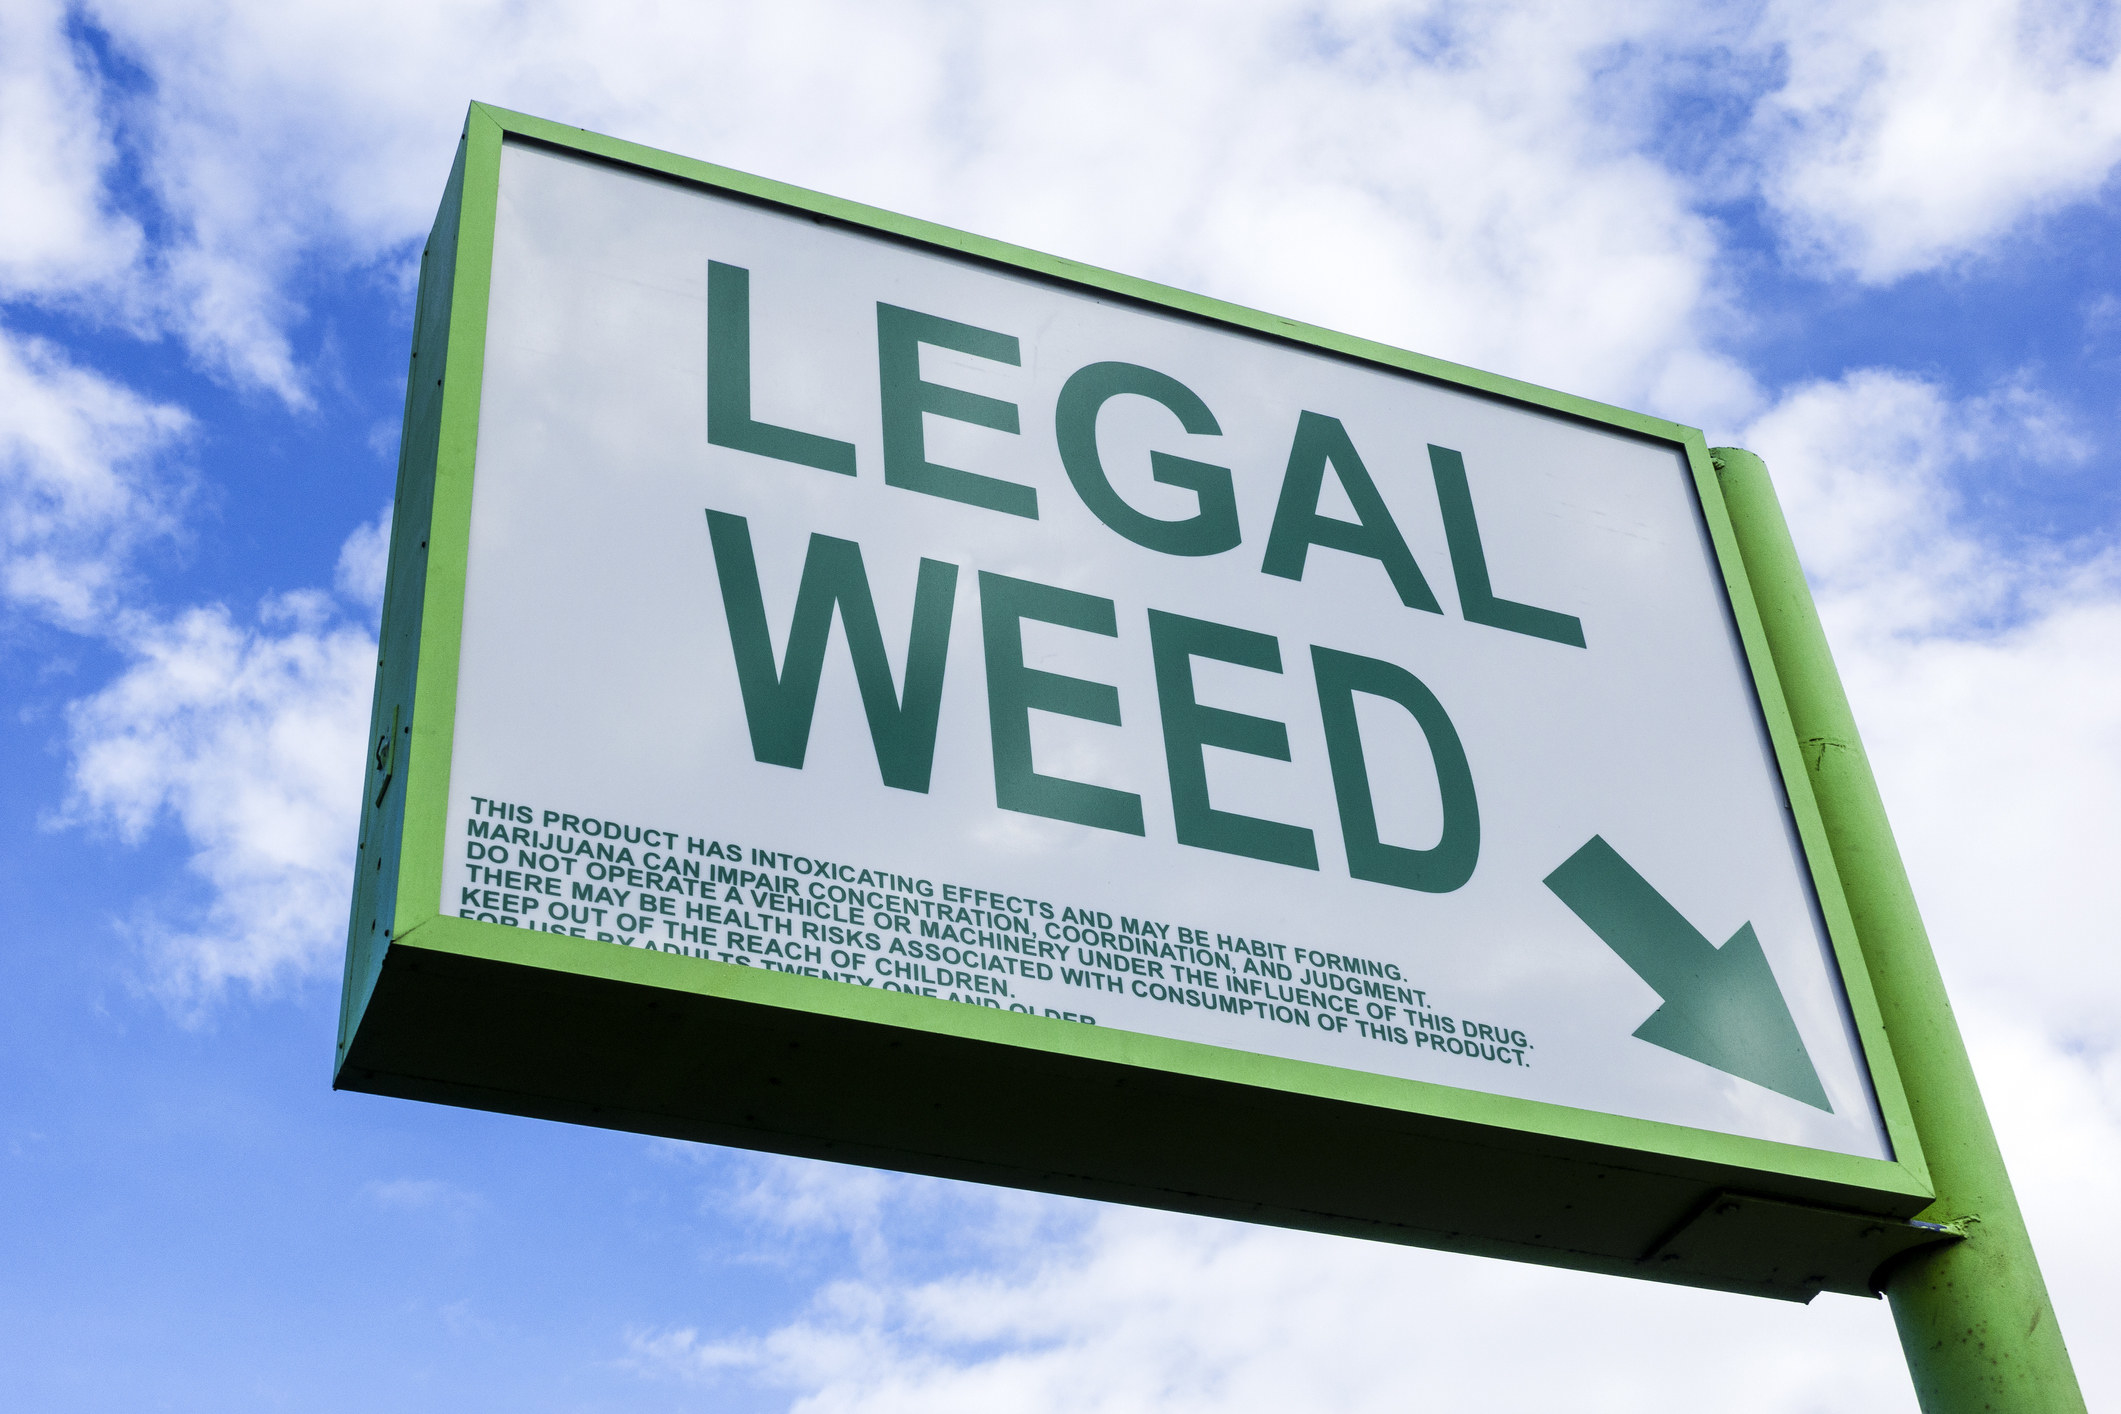 a legal weed sign